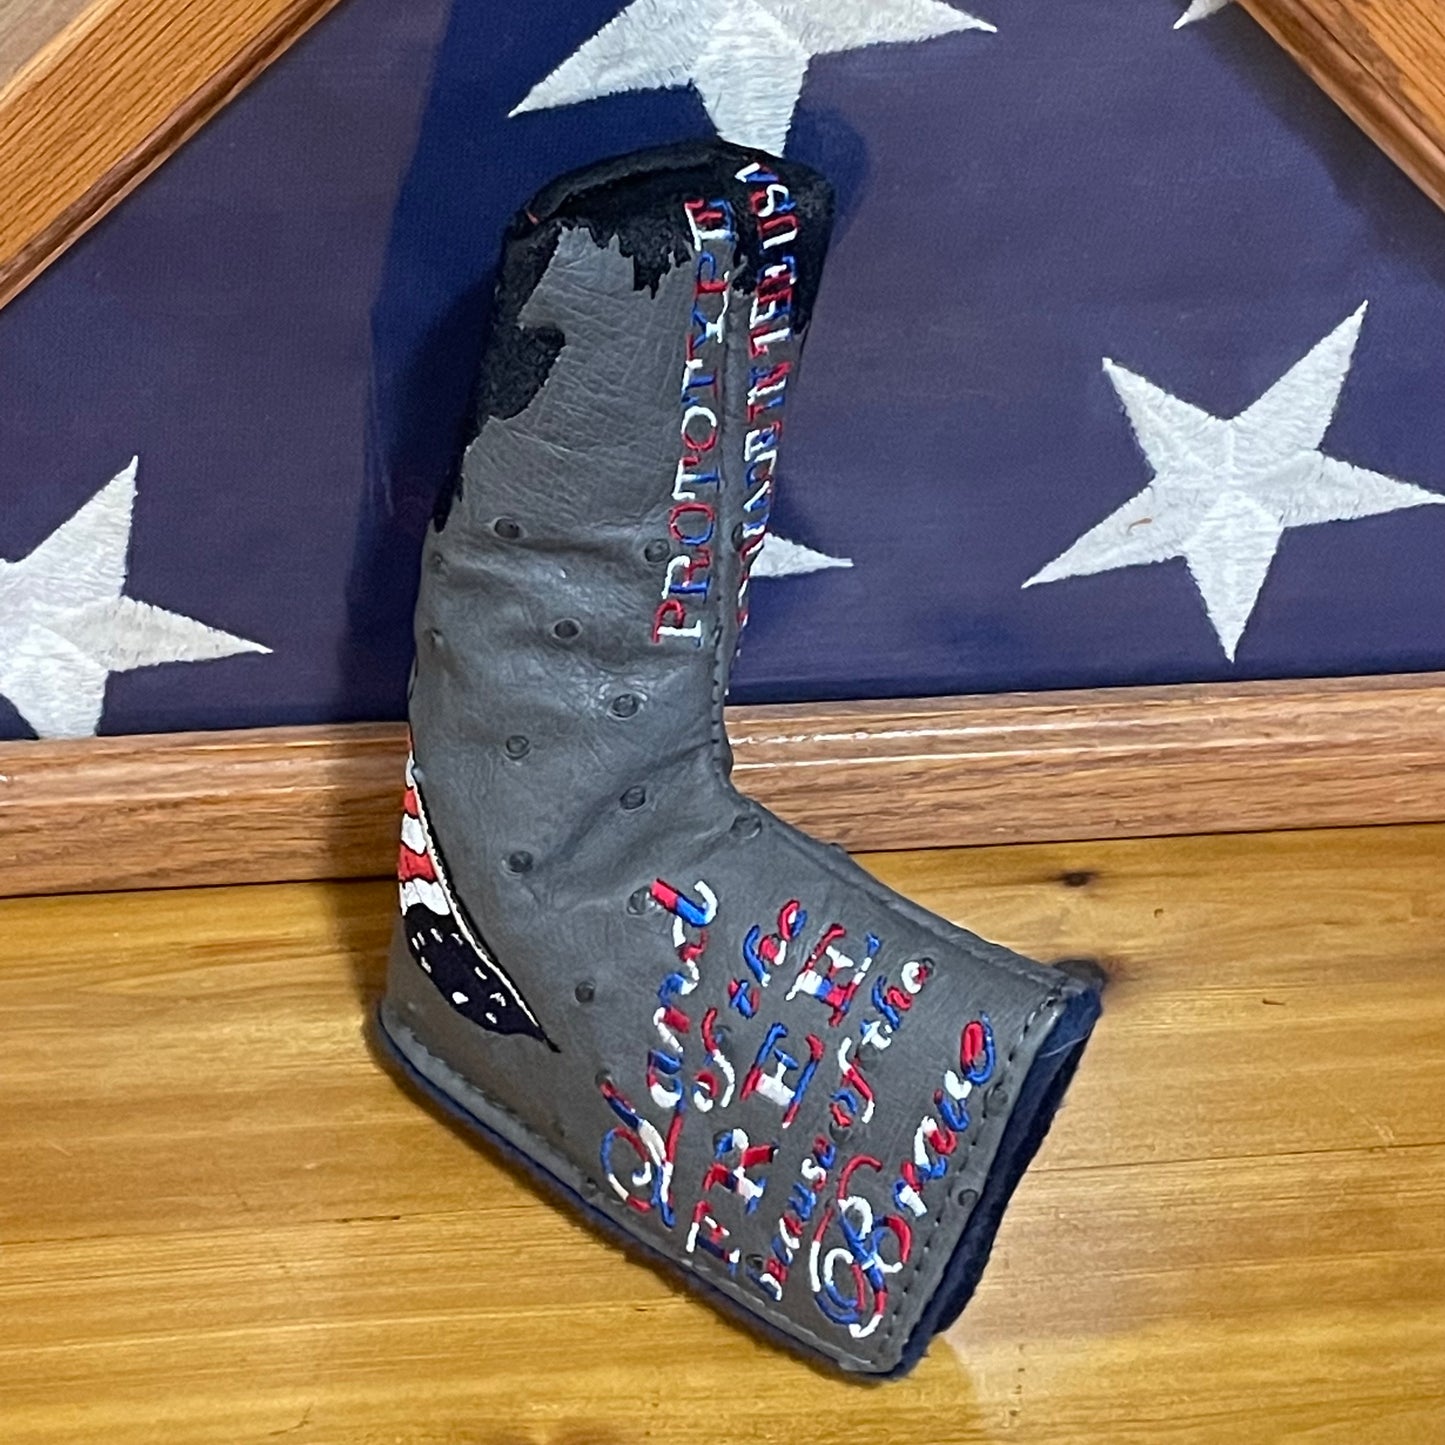 CHARITY AUCTION - Veterans Day Genuine Ostrich Blade Prototype Cover